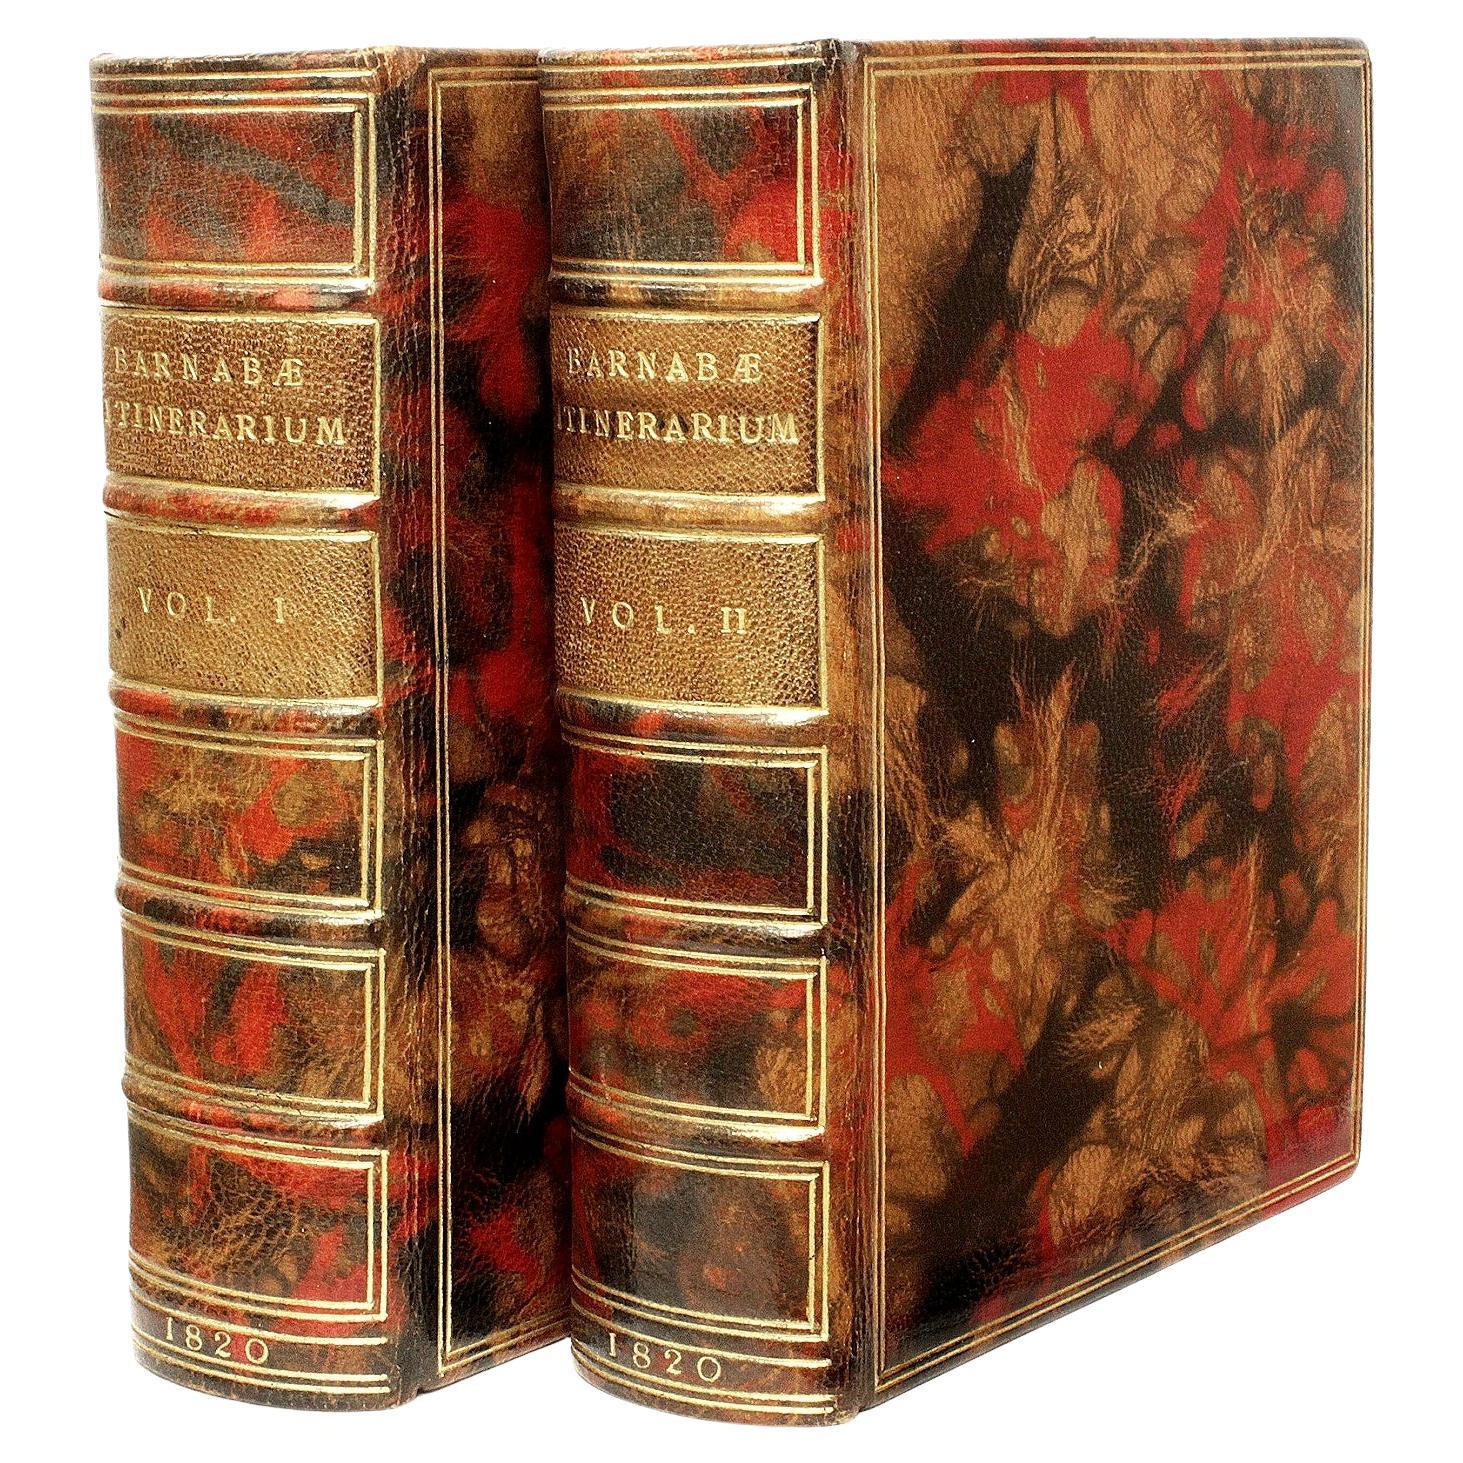 Barnabae Itenerarium, or Barnabee's Journal. 1820 - 2 vols - BOUND BY DE COVERLY